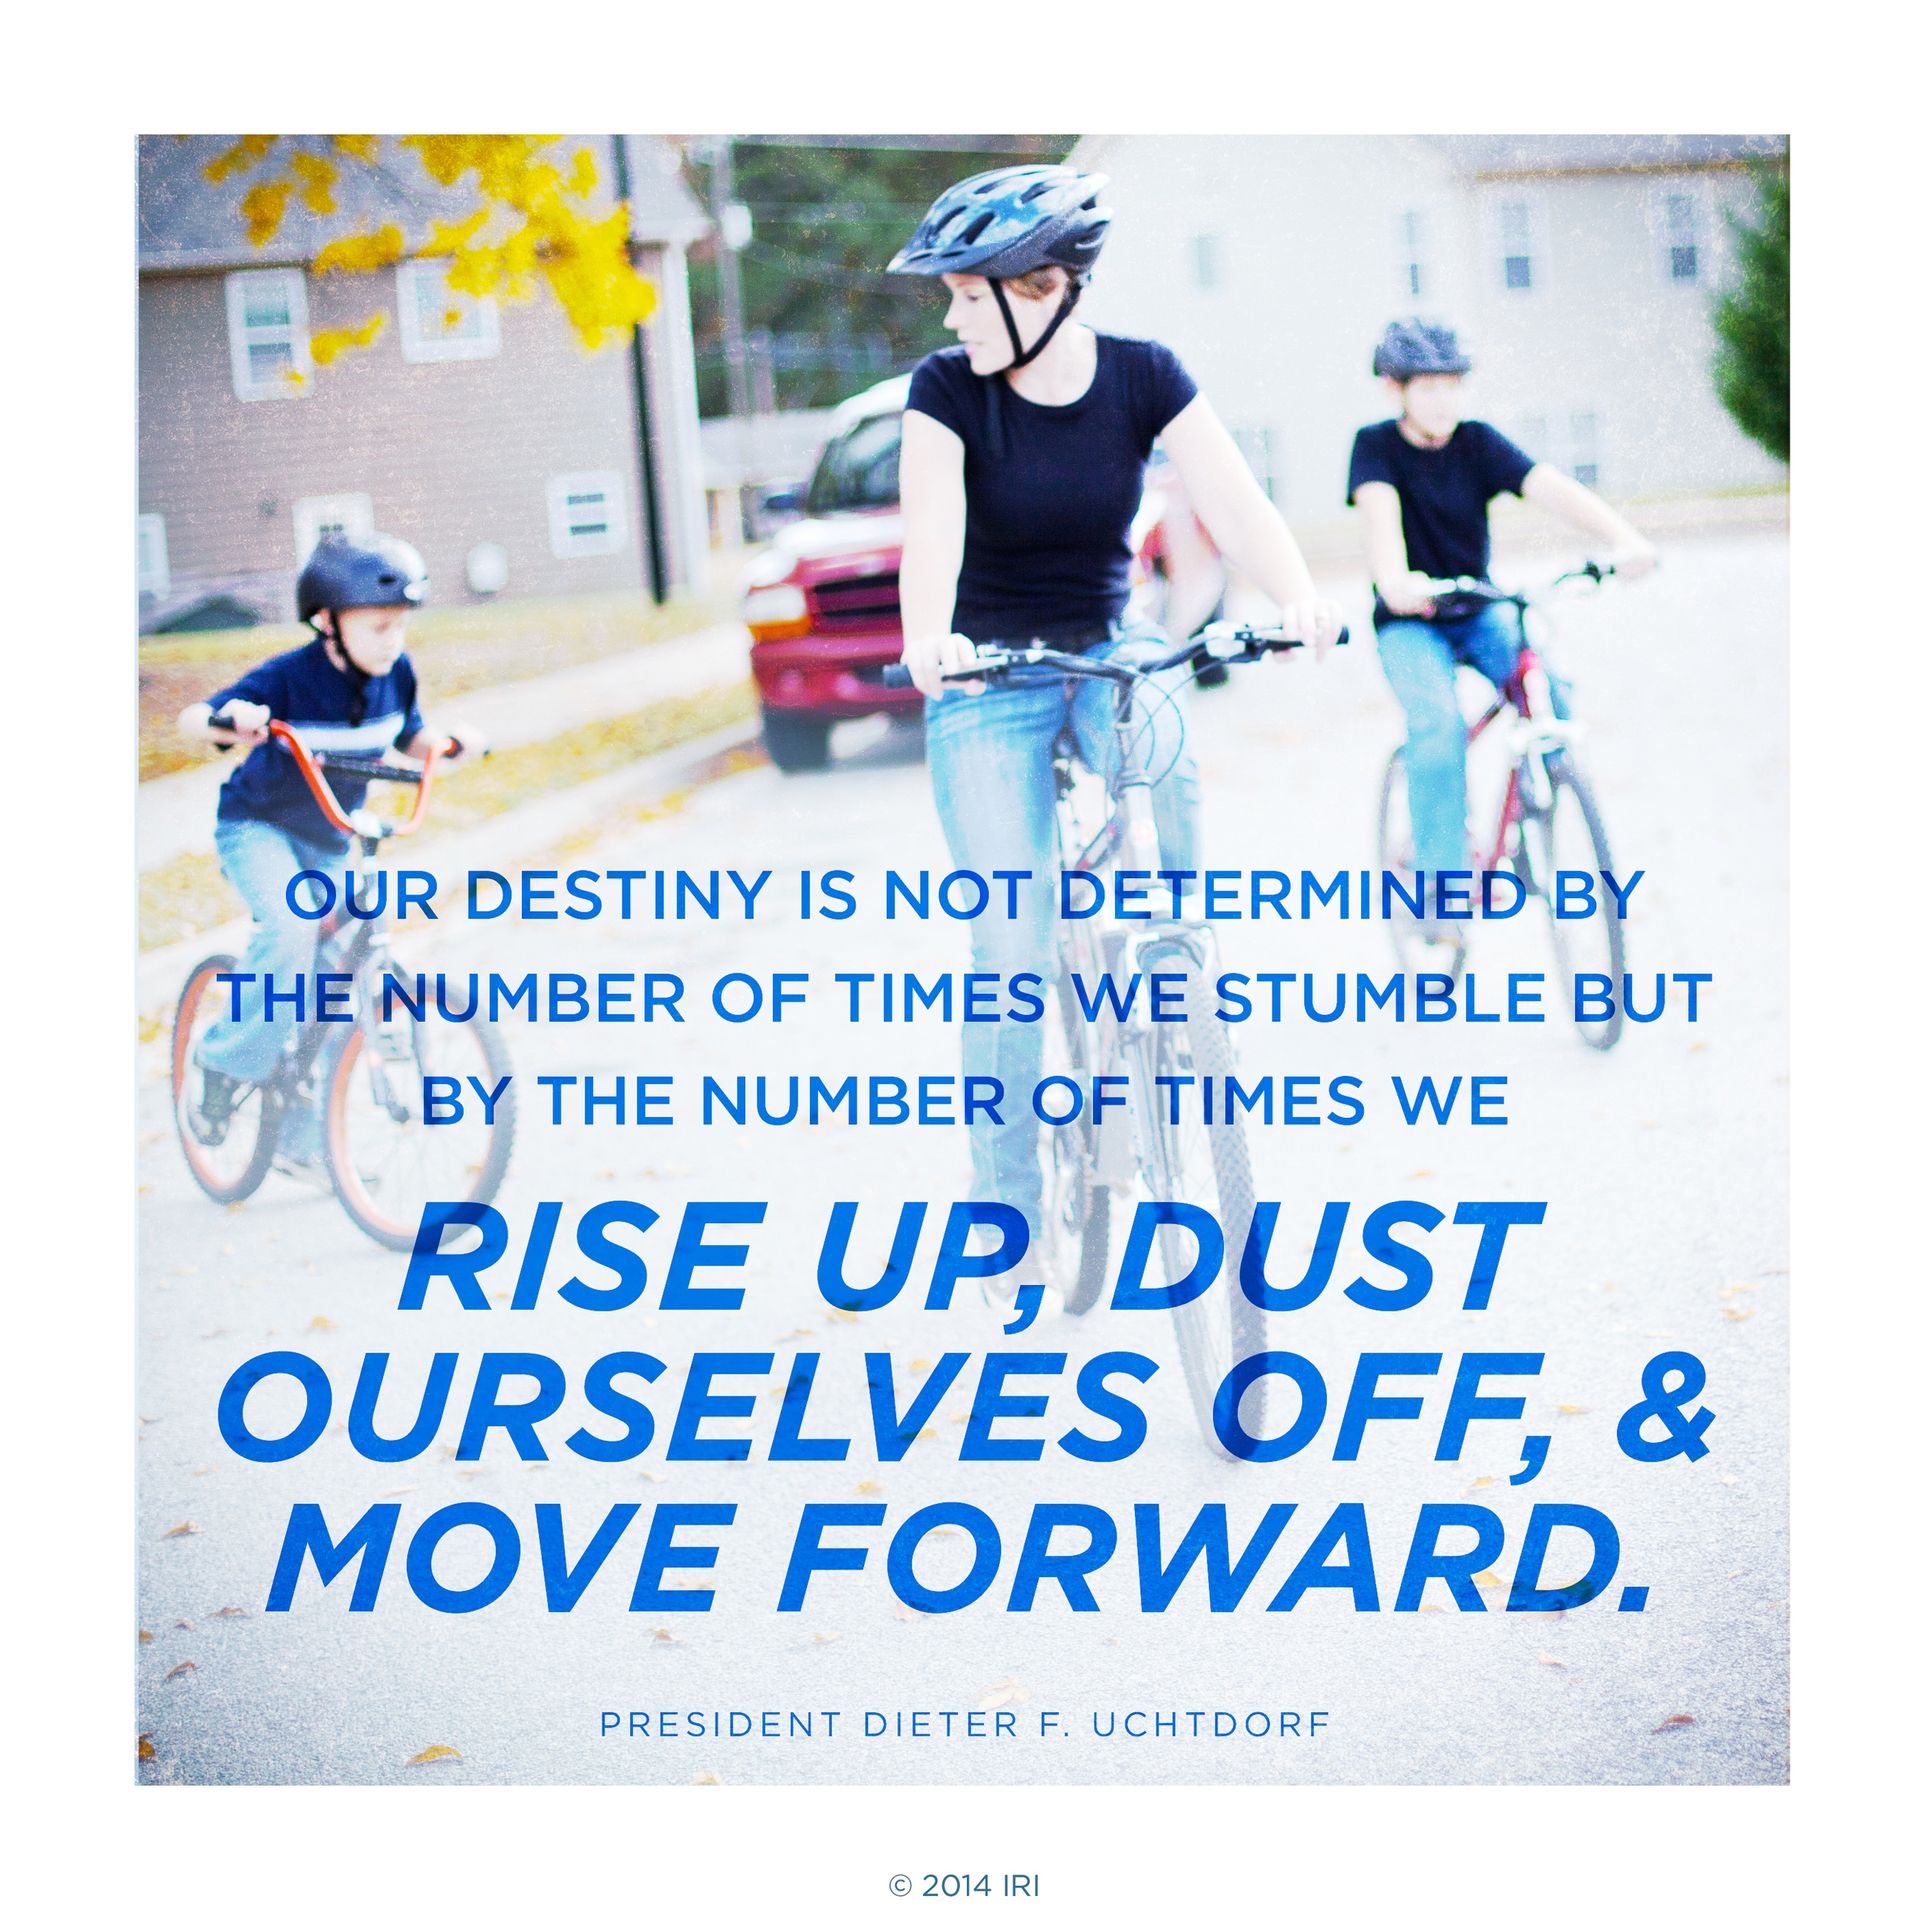 “Our destiny is not determined by the number of times we stumble but by the number of times we rise up, dust ourselves off, and move forward.”—President Dieter F. Uchtdorf, “You Can Do It Now!”  